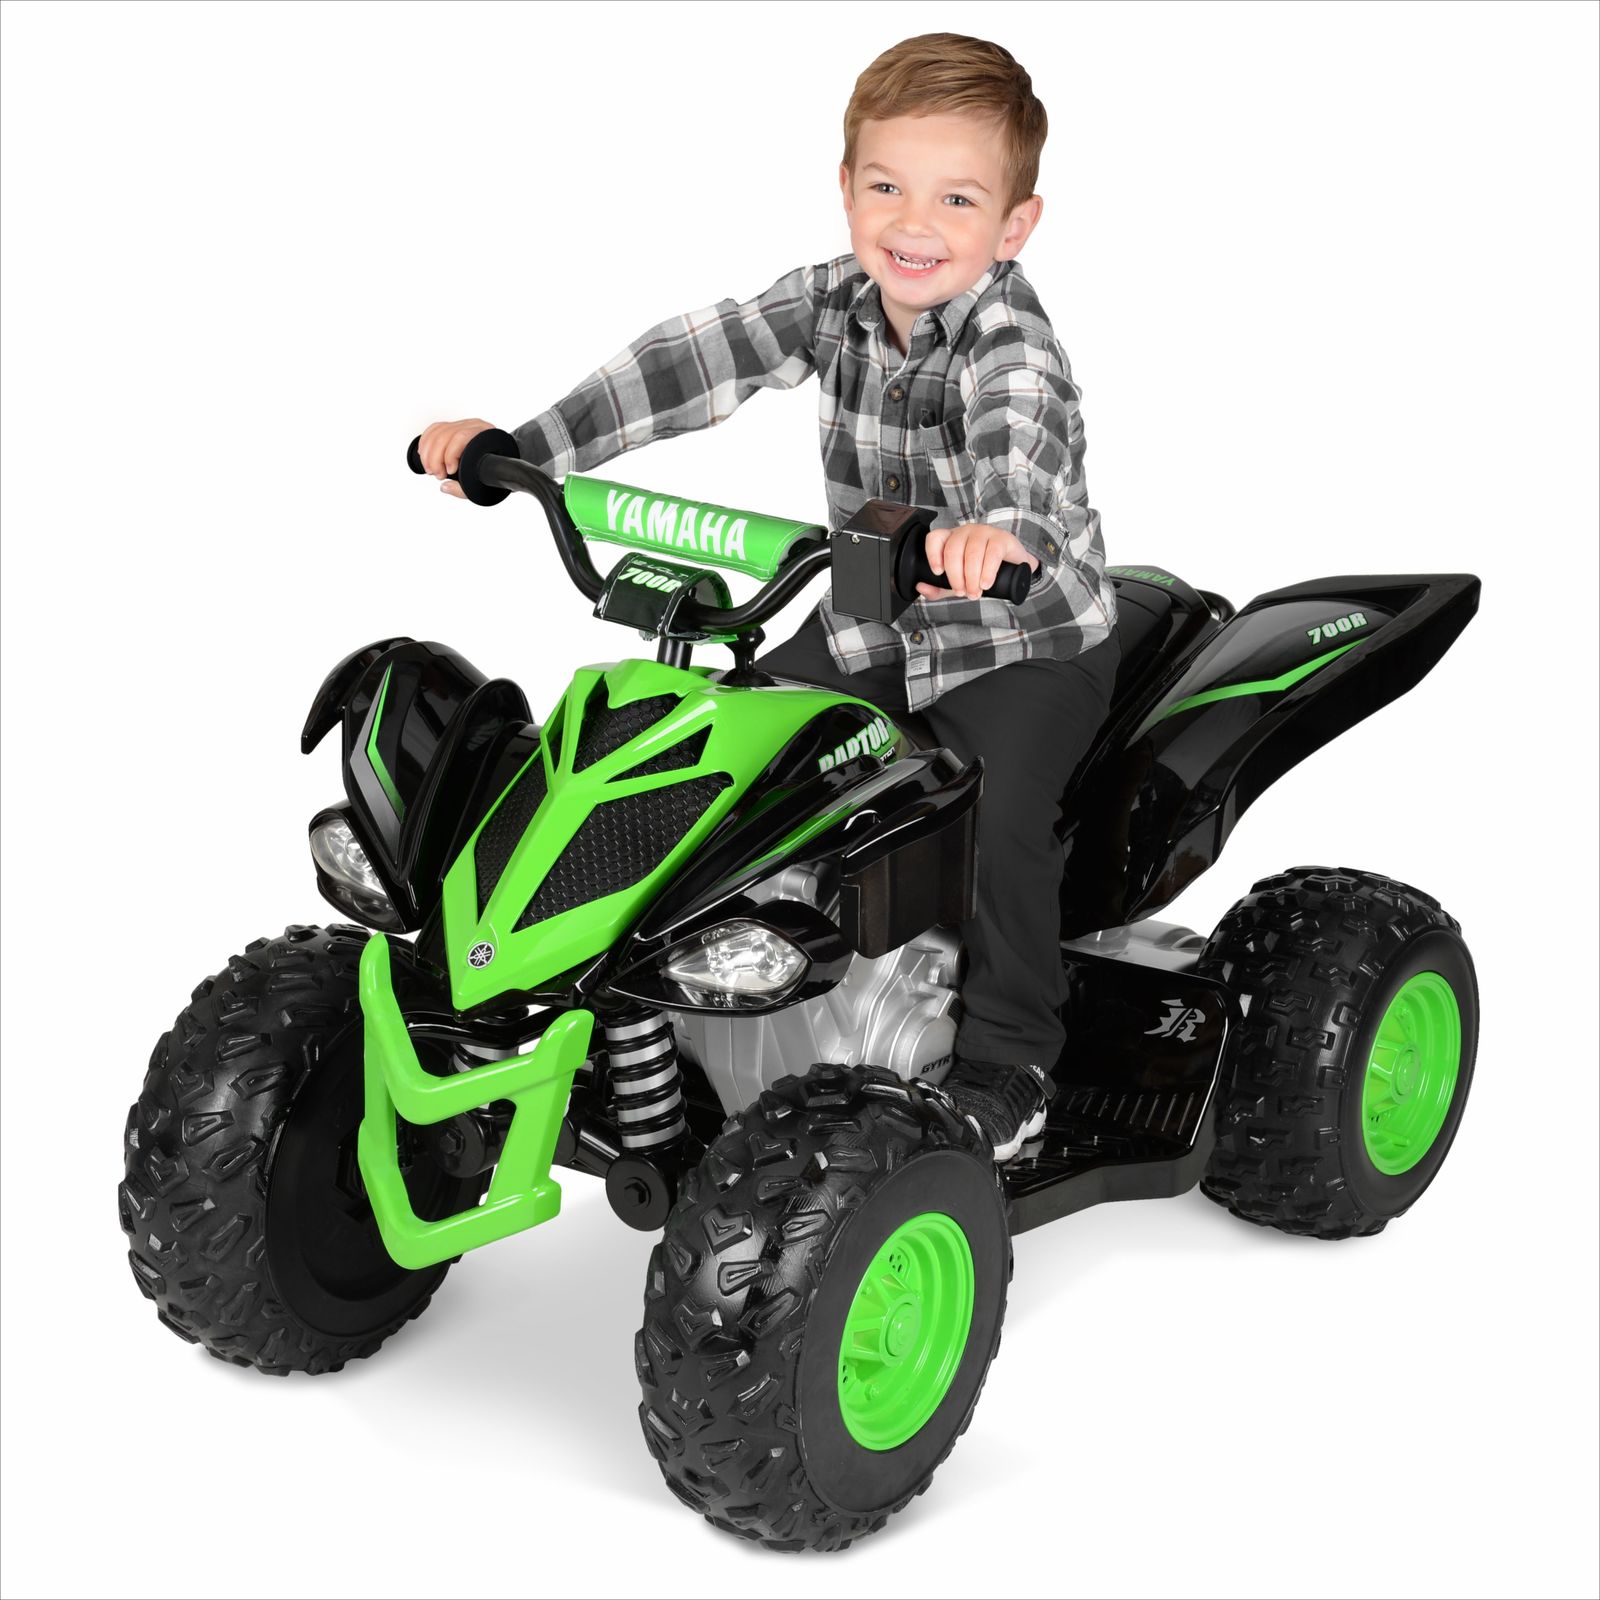 difference between 12 volt and 24 volt ride on toys